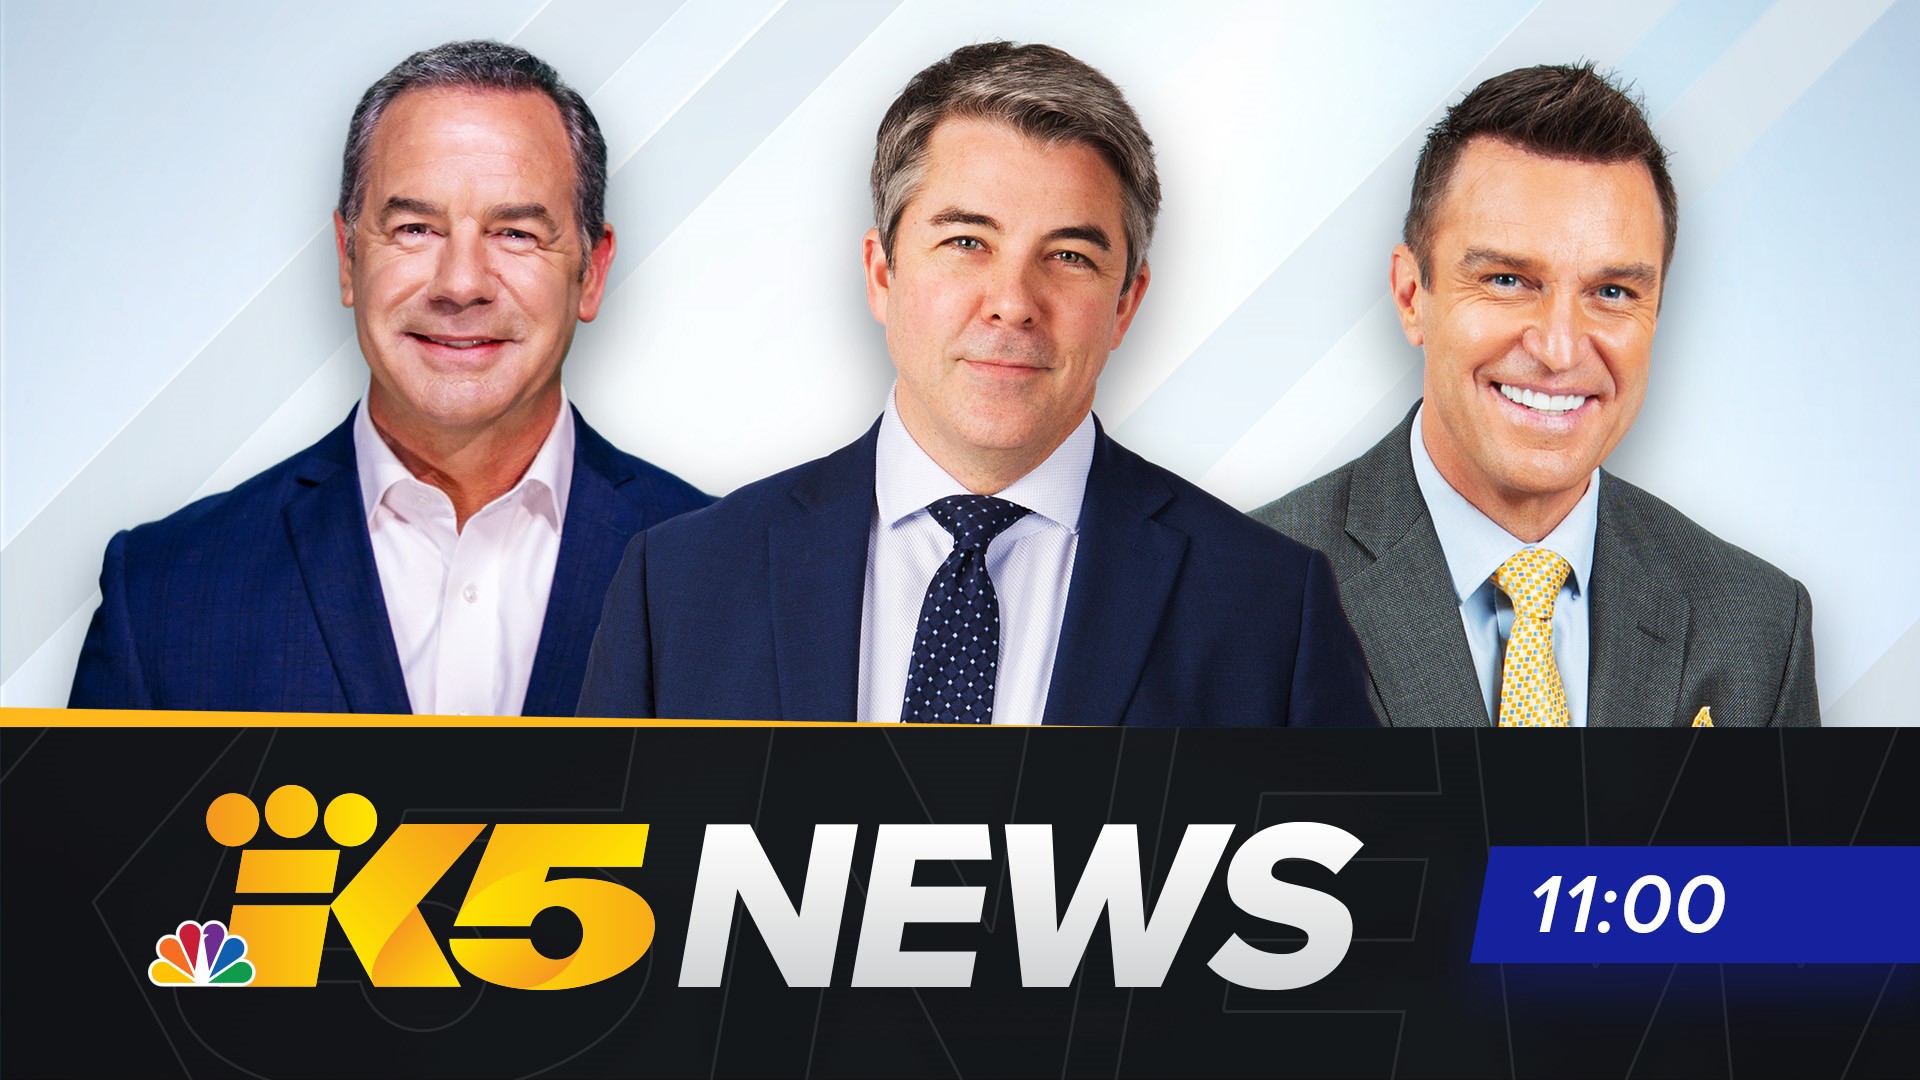 The KING 5 News Team presents the day's major news events, local sports updates, and weather forecast.